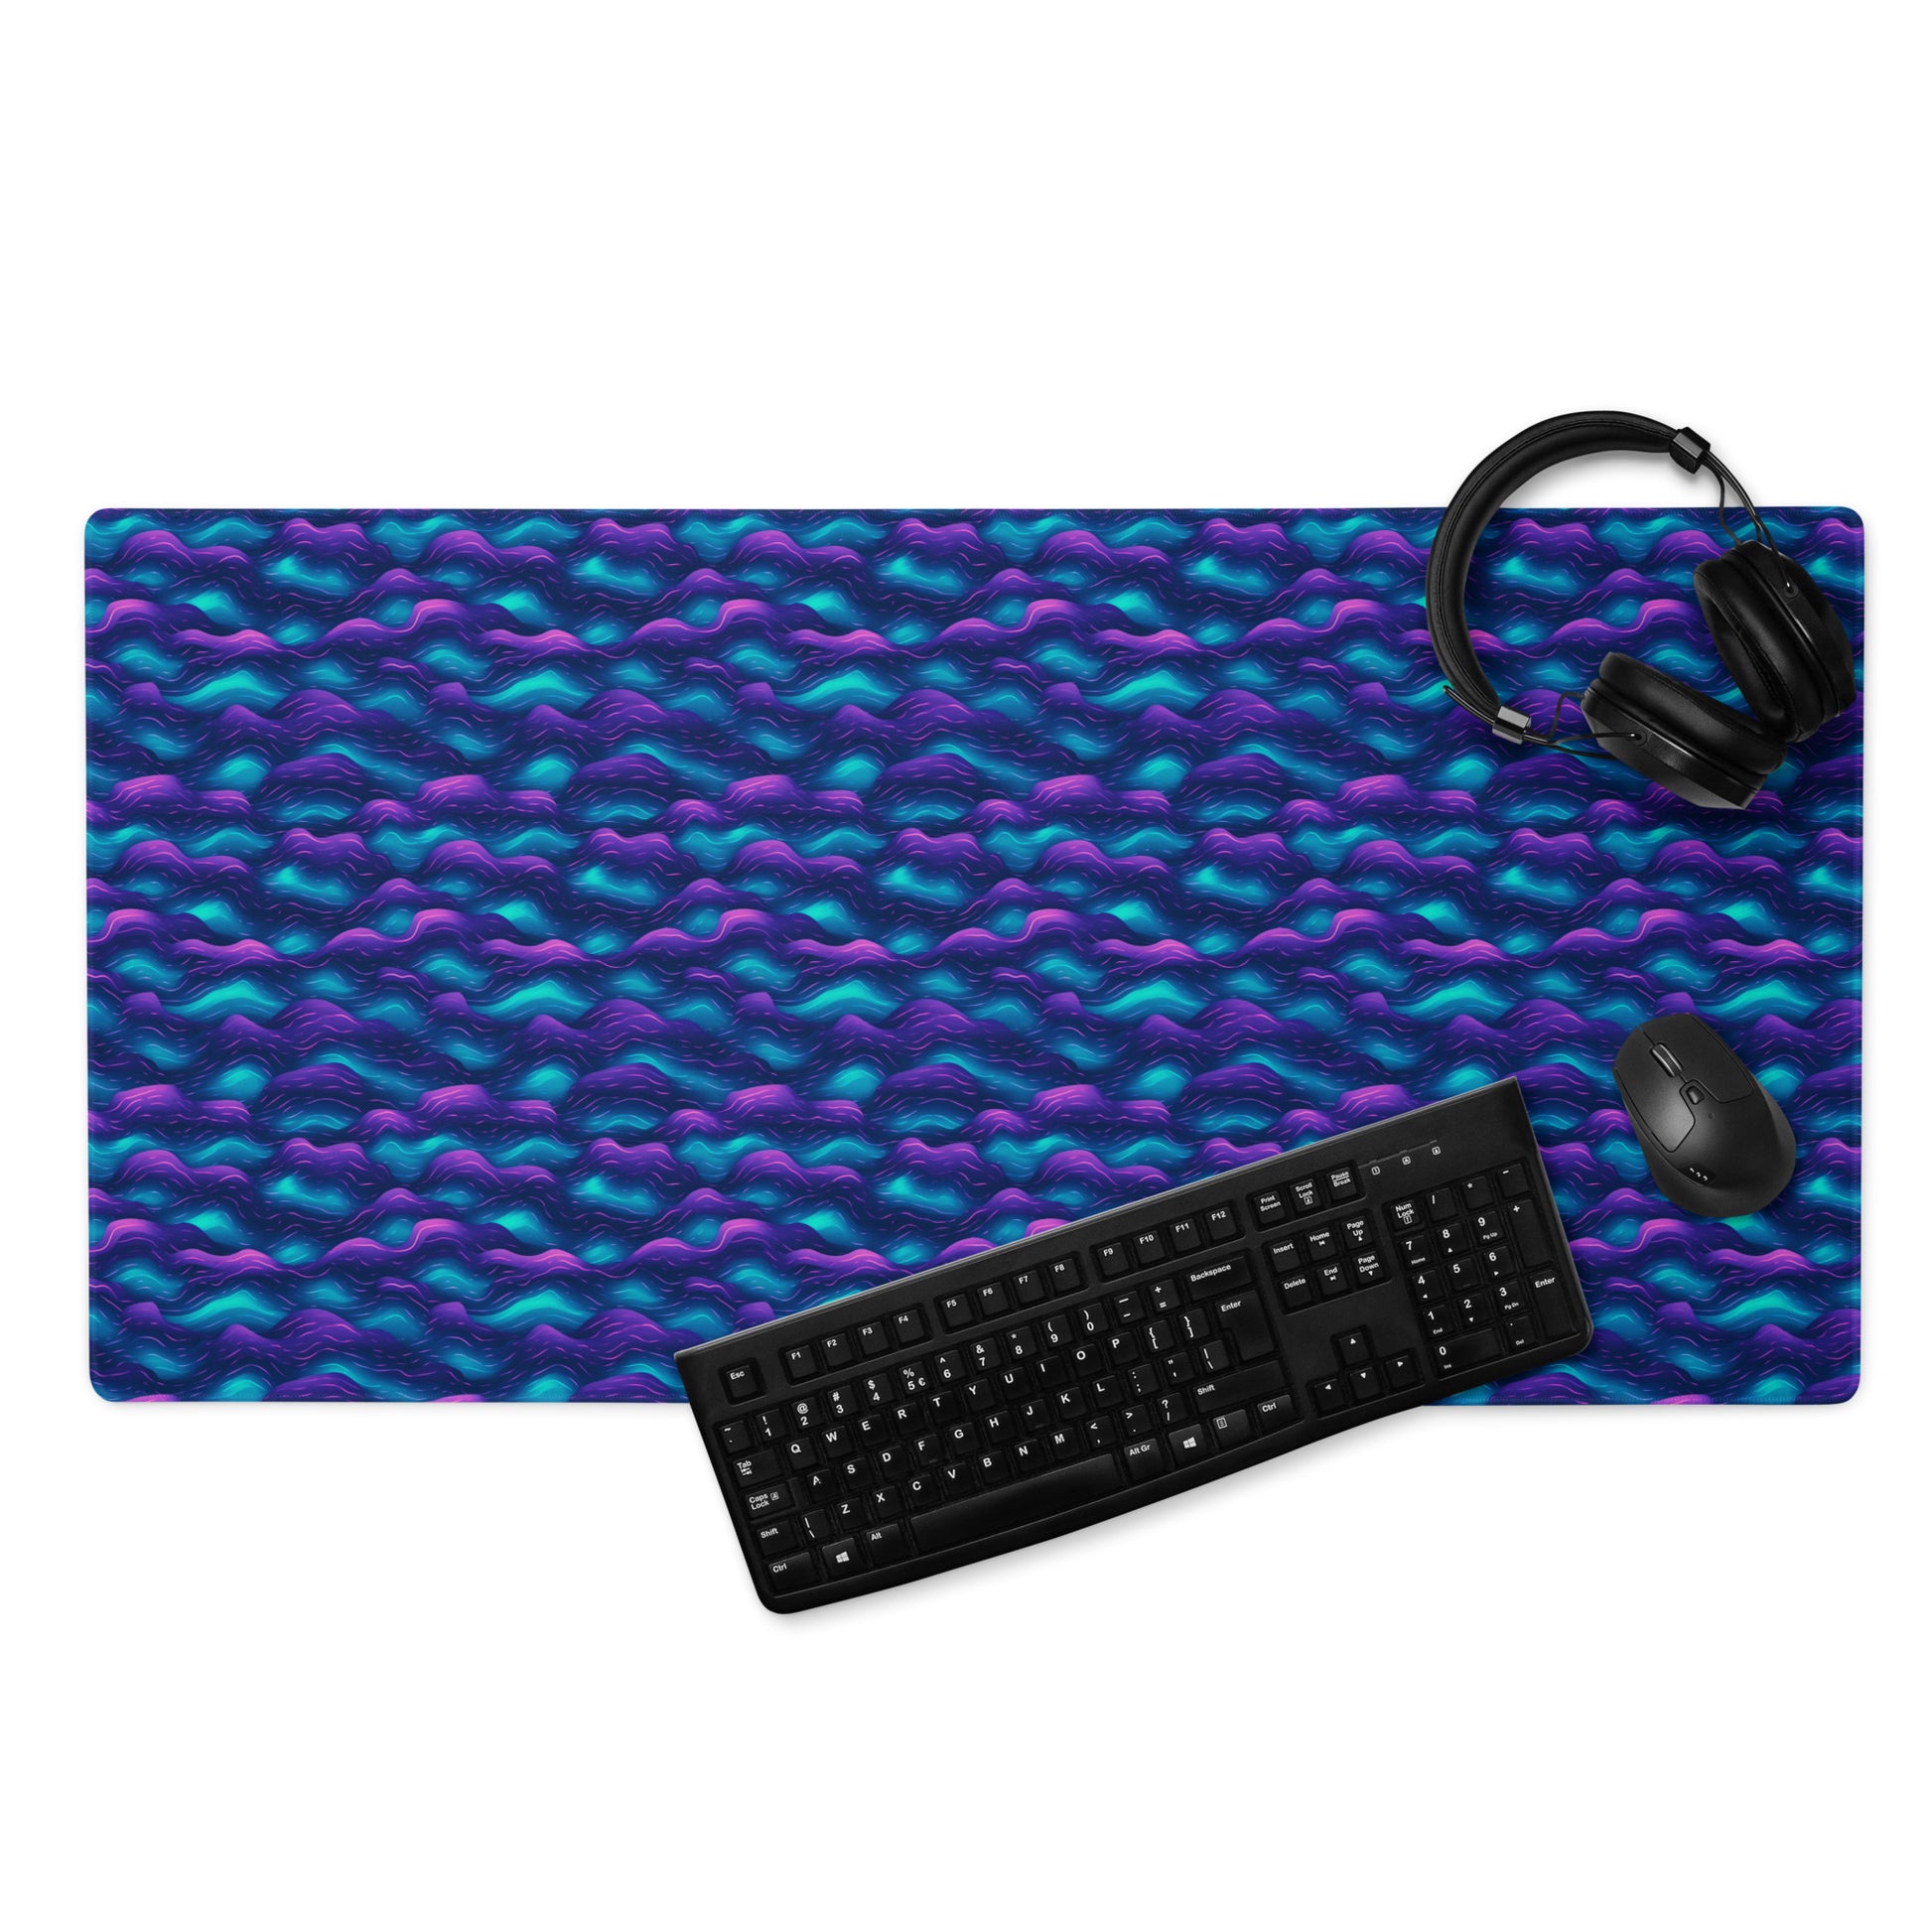 A 36" x 18" desk pad with blue and purple wave pattern. With a keyboard, mouse, and headphones sitting on it.